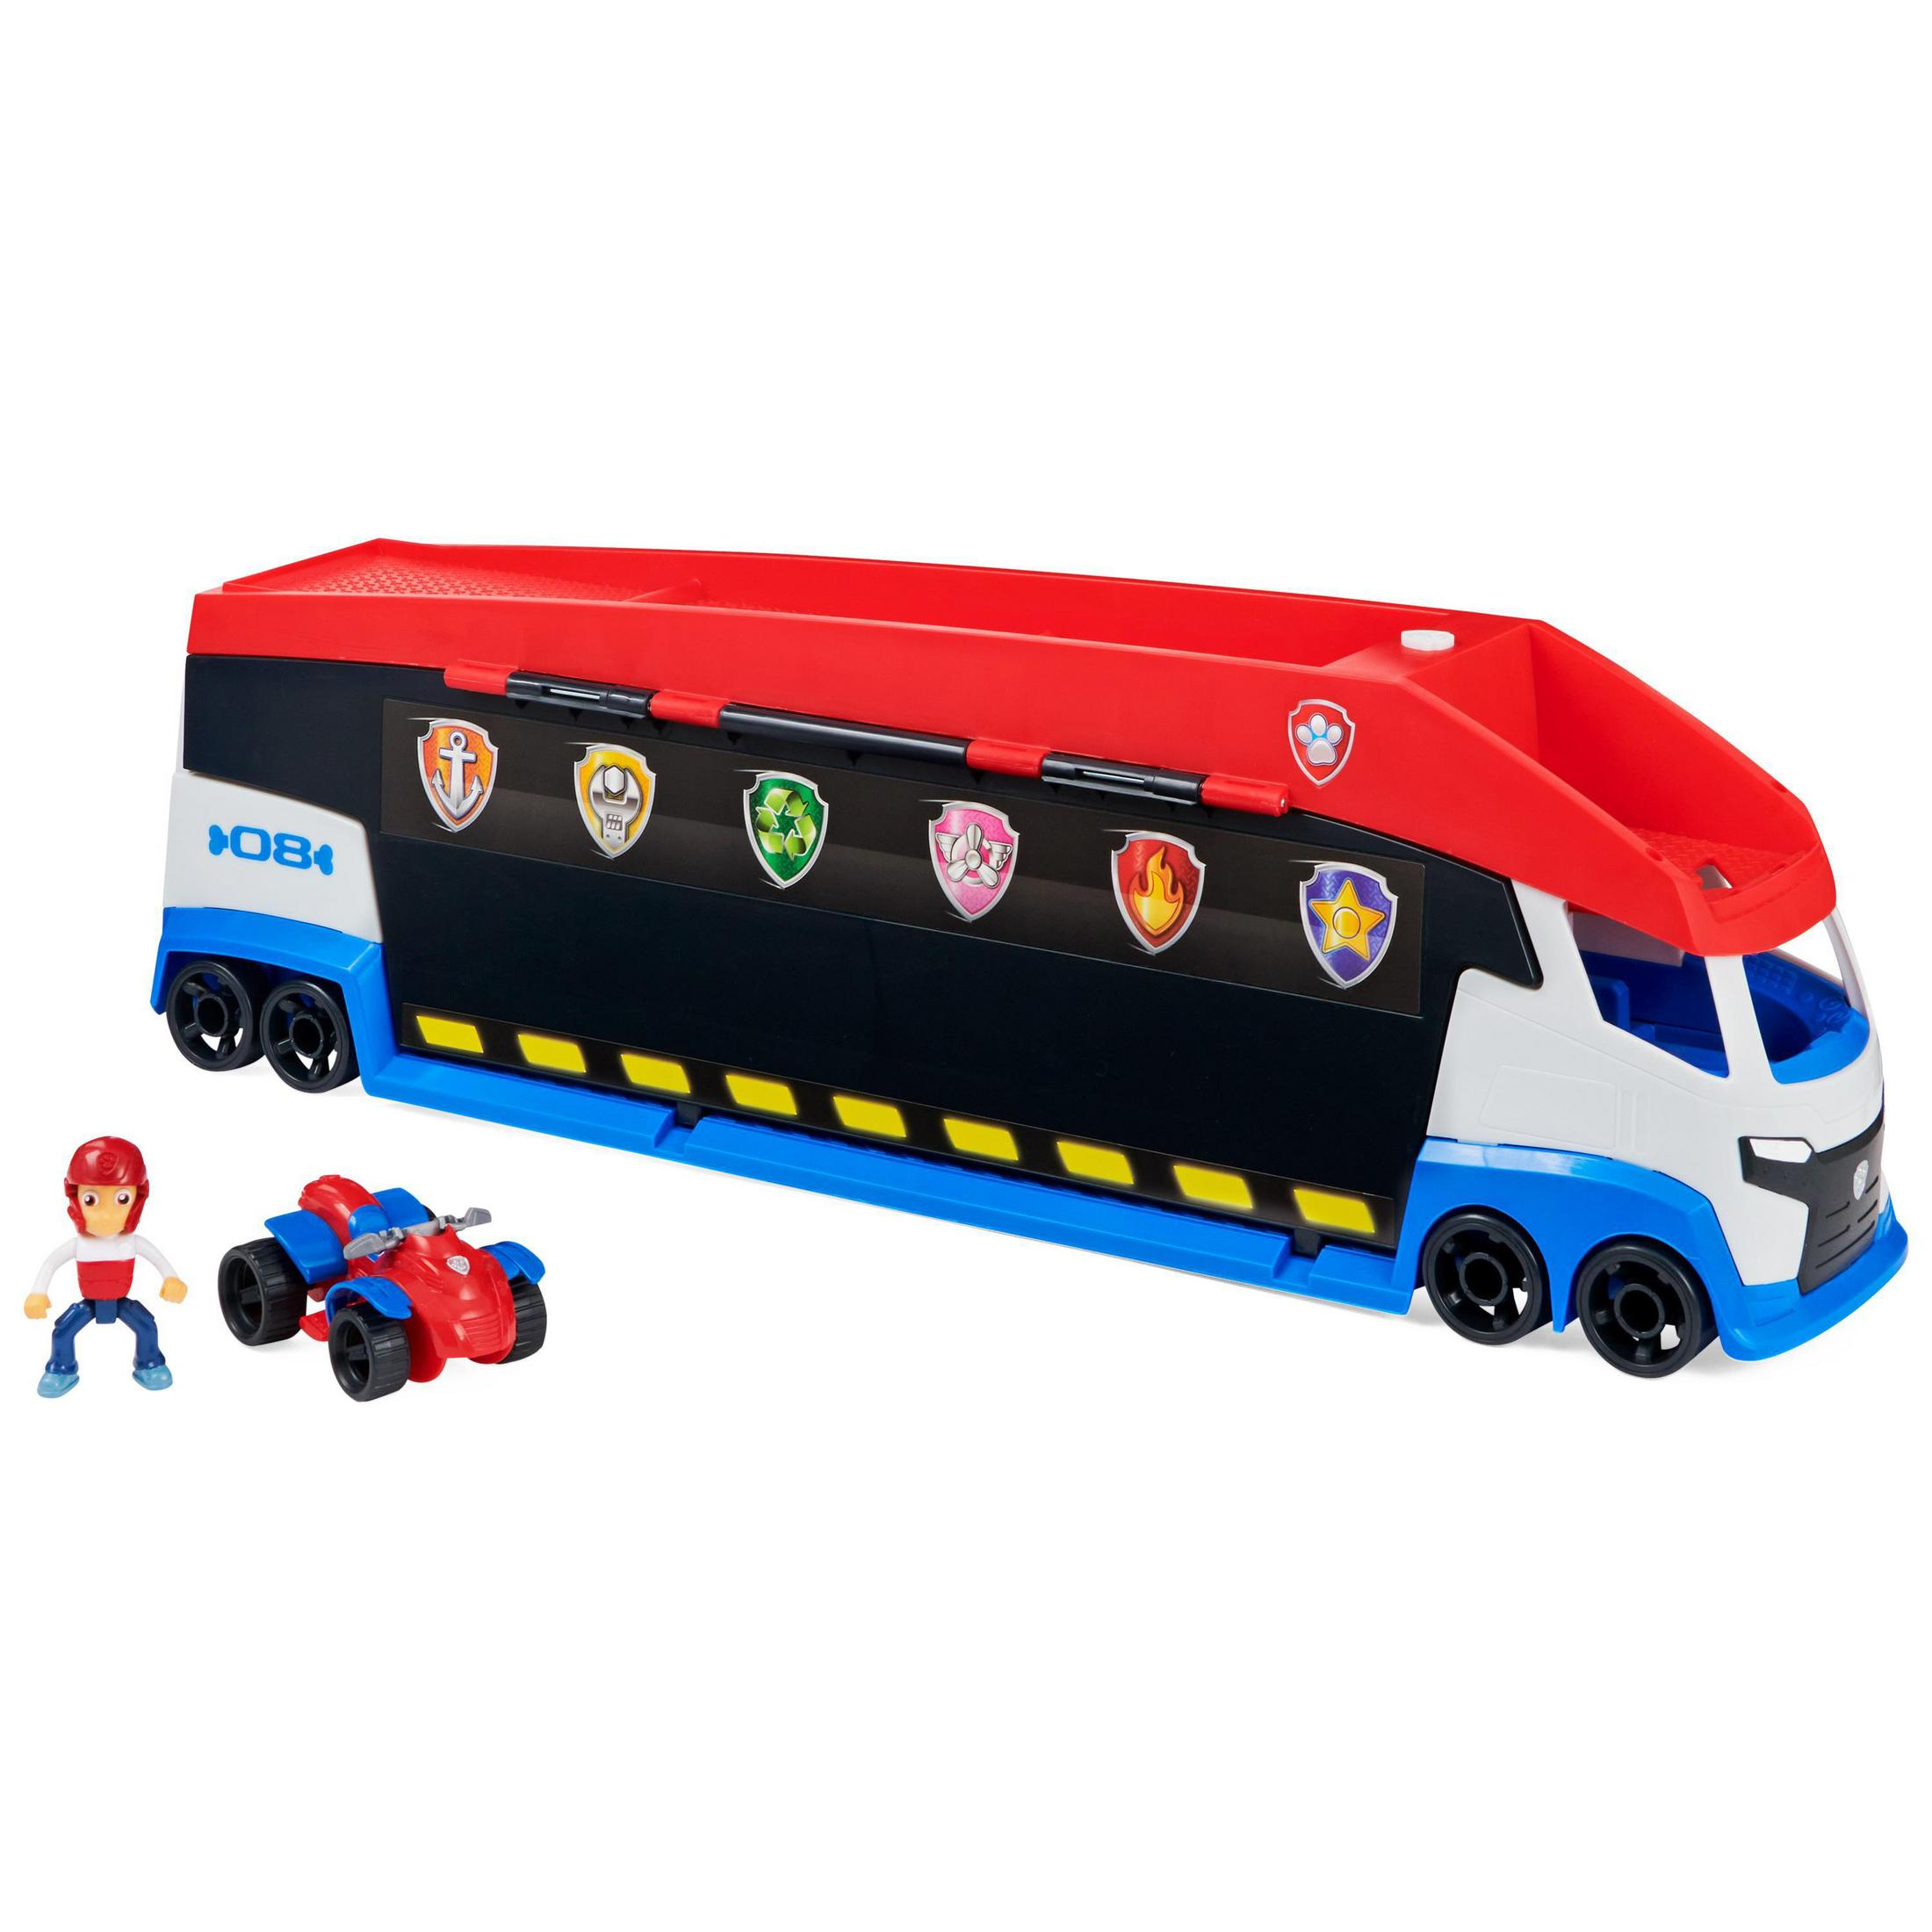 SPIN MASTER 33143 2.0 Spielset PAW PAW PATROLLER